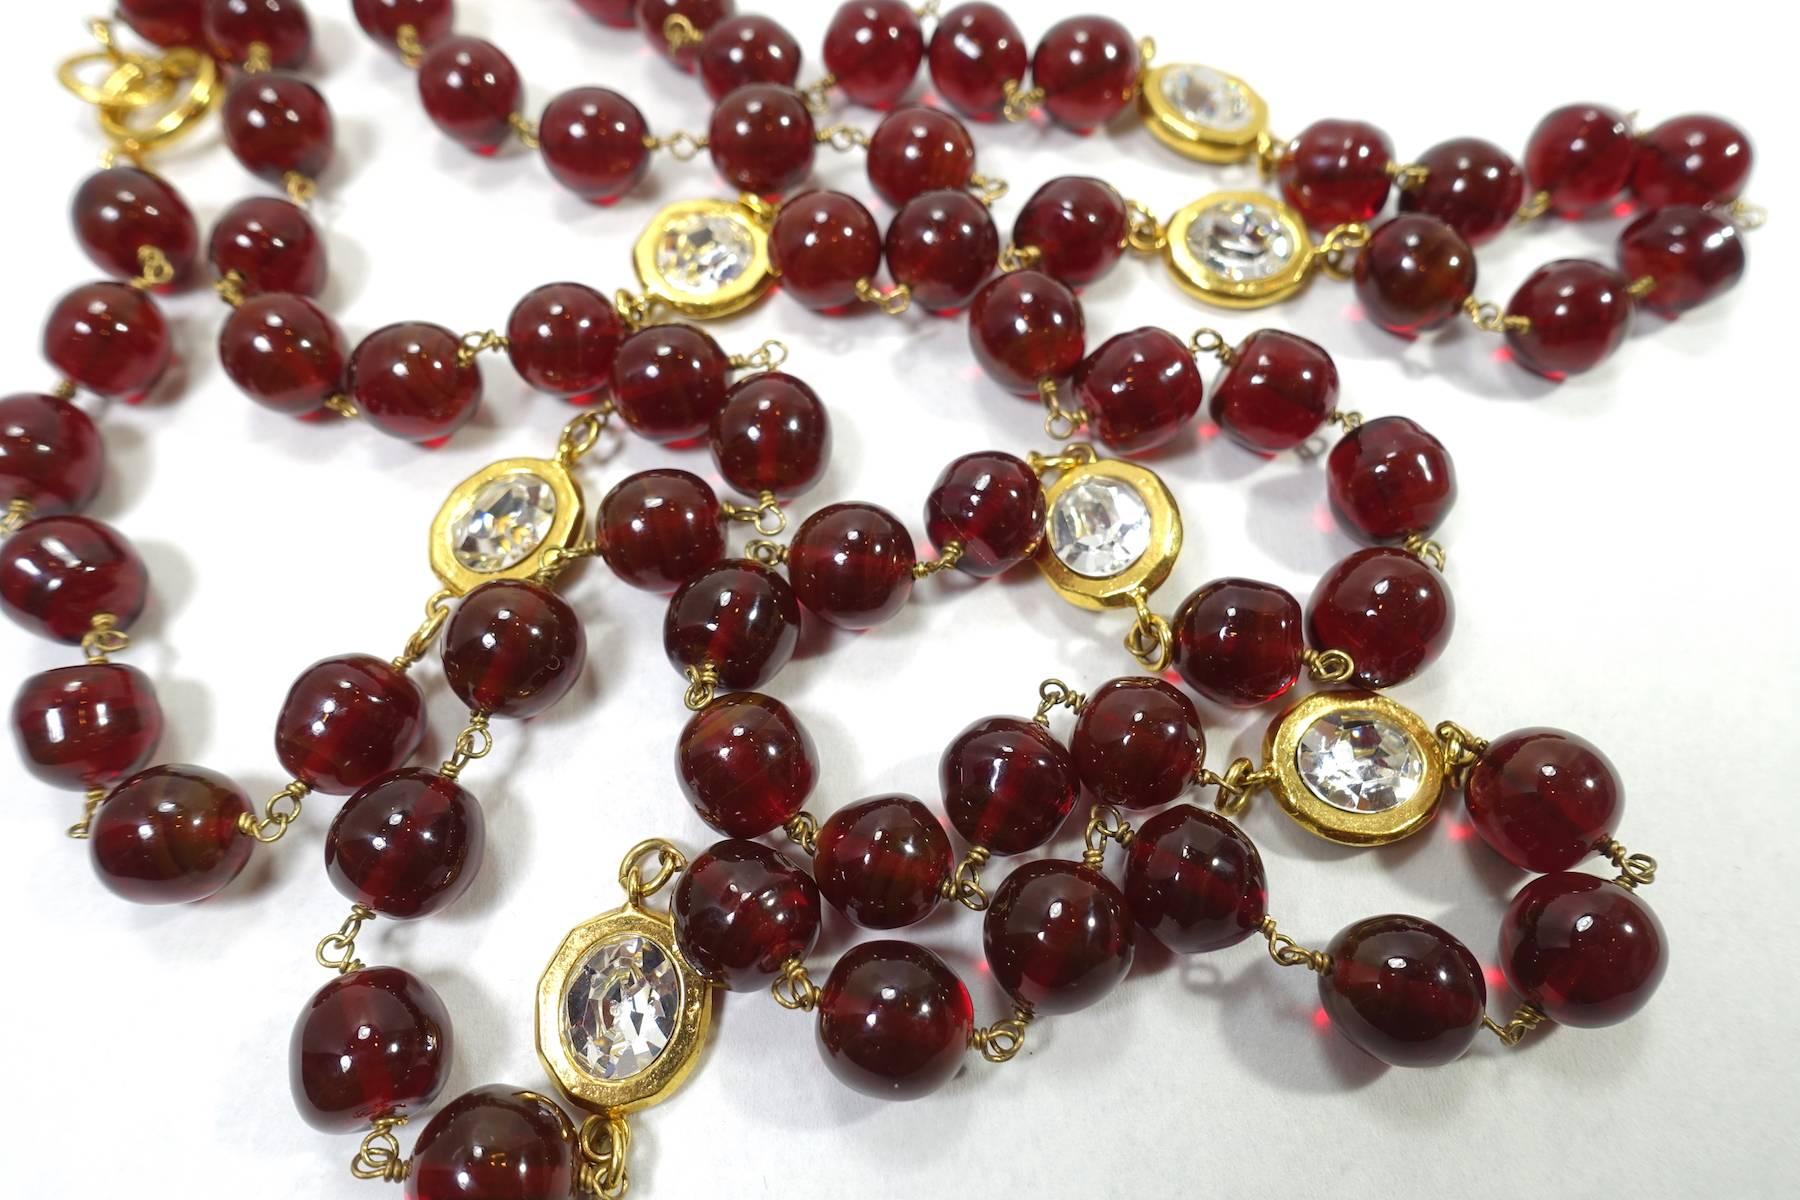 Women's Vintage Signed Chanel 70s Cranberry Gripoix Glass and Crystal Sautoir Necklace